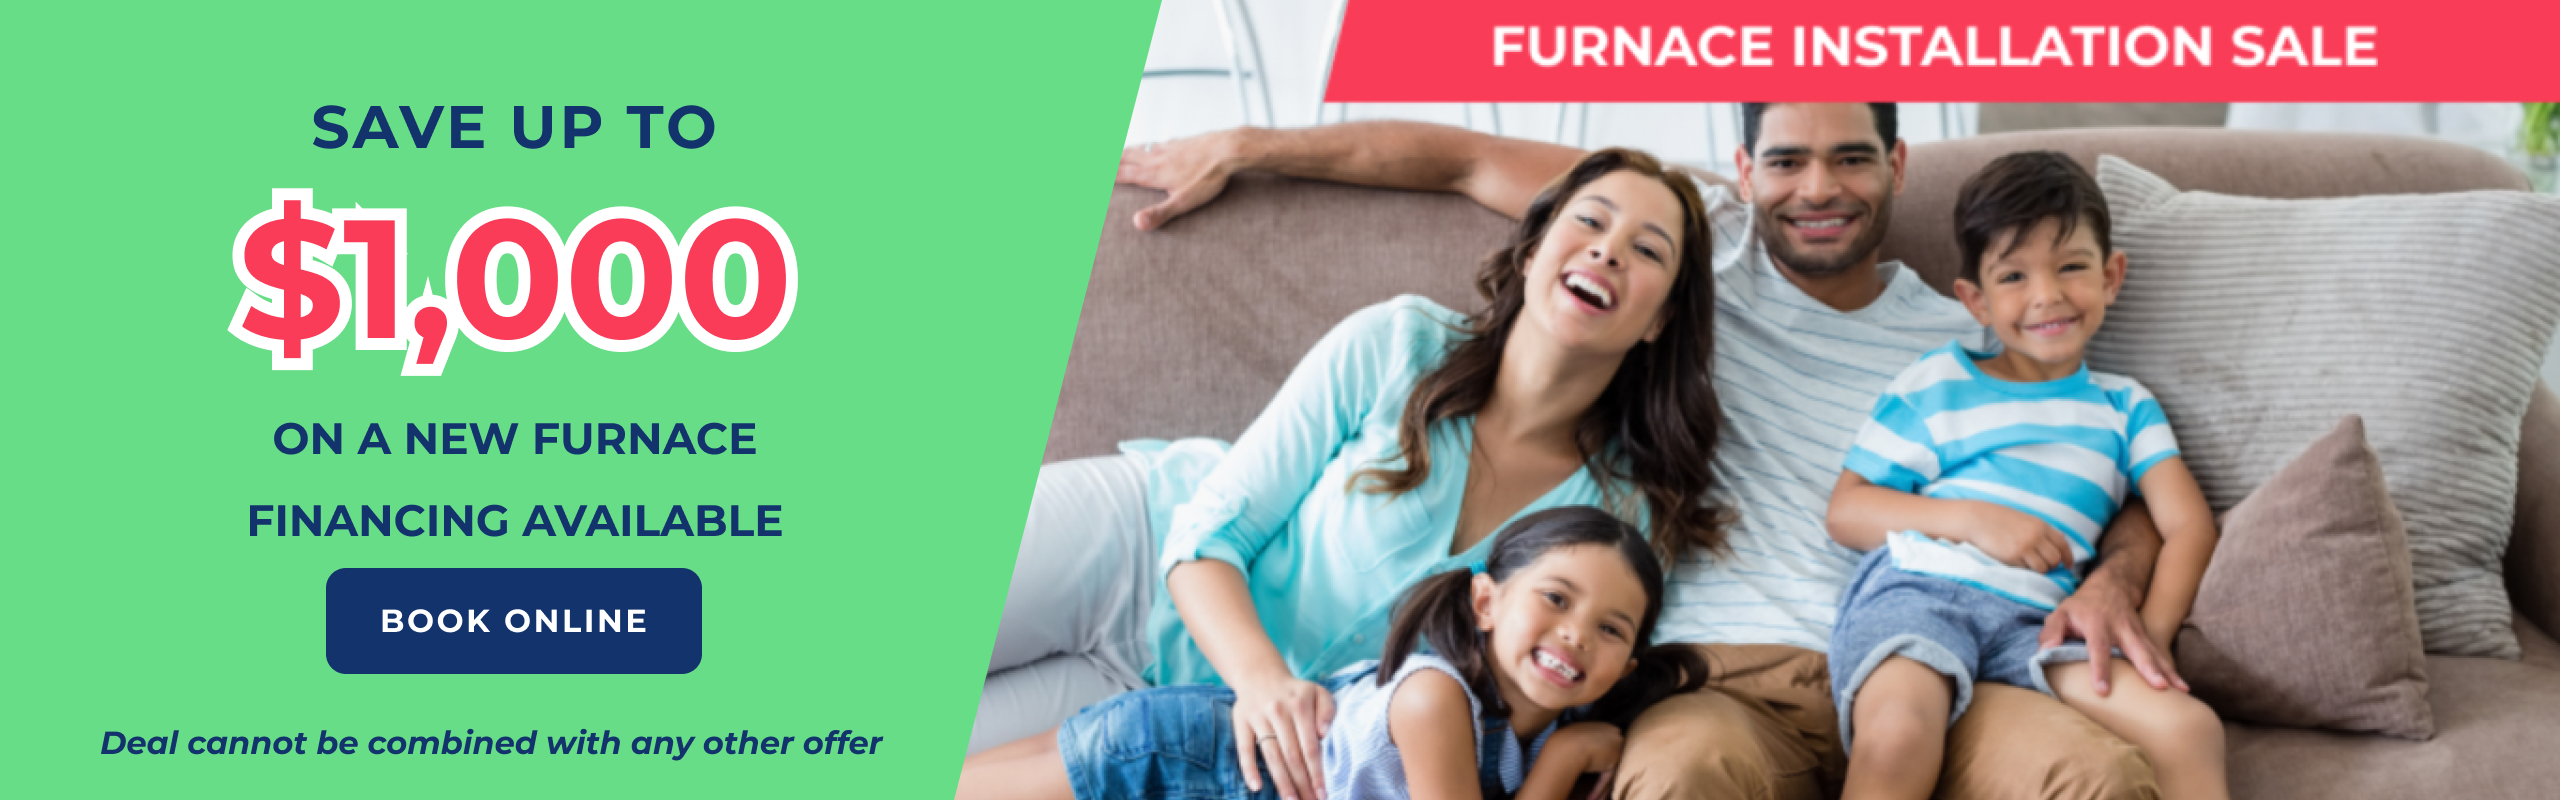 Furnace Installation Fort Erie: save up to $1000 on a new furnace